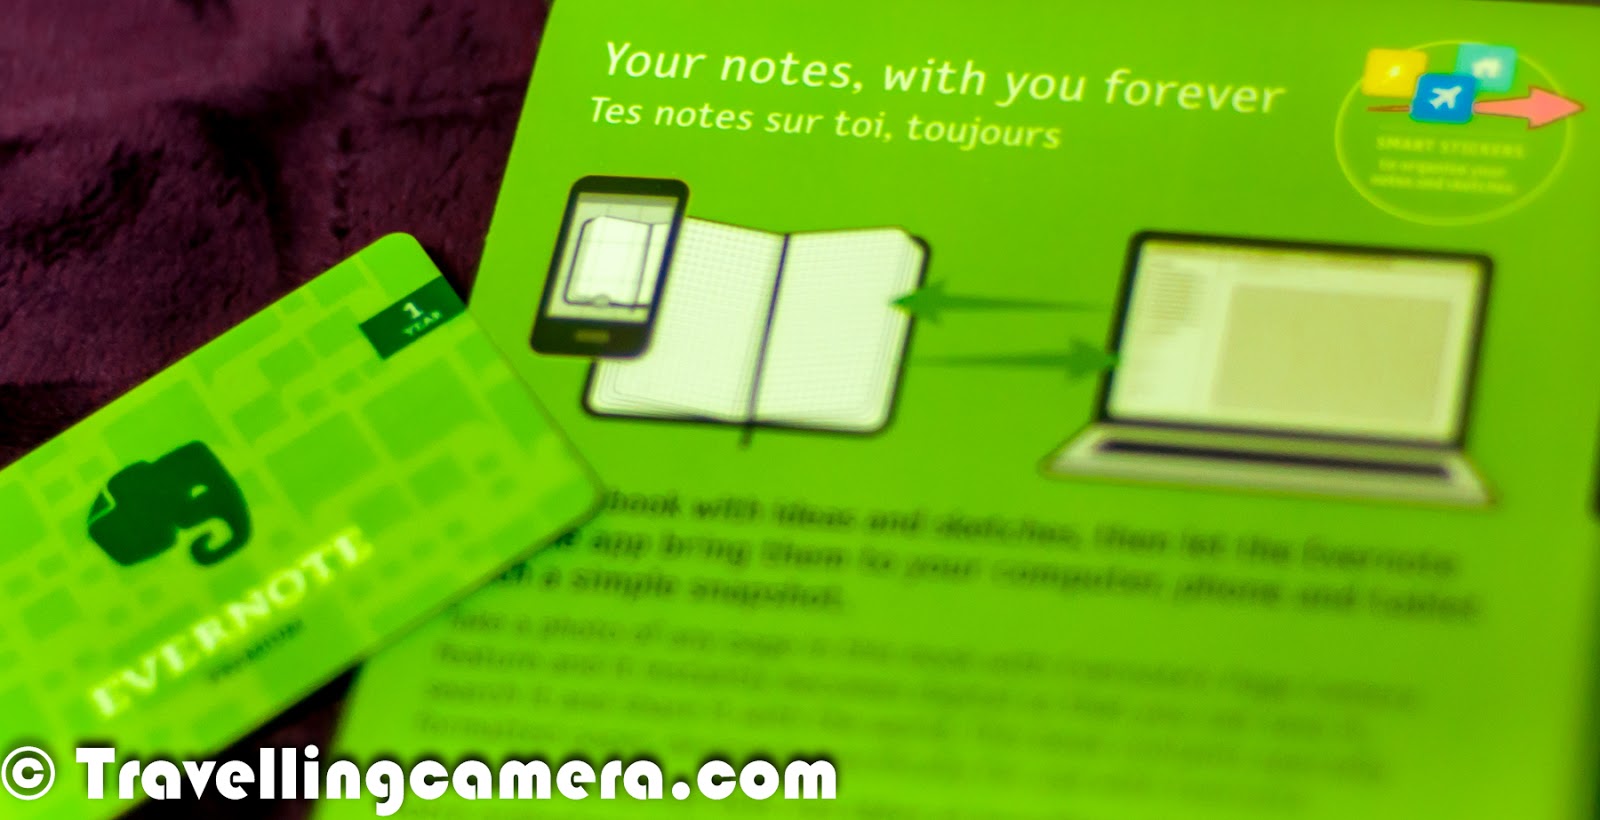 try evernote premium for free